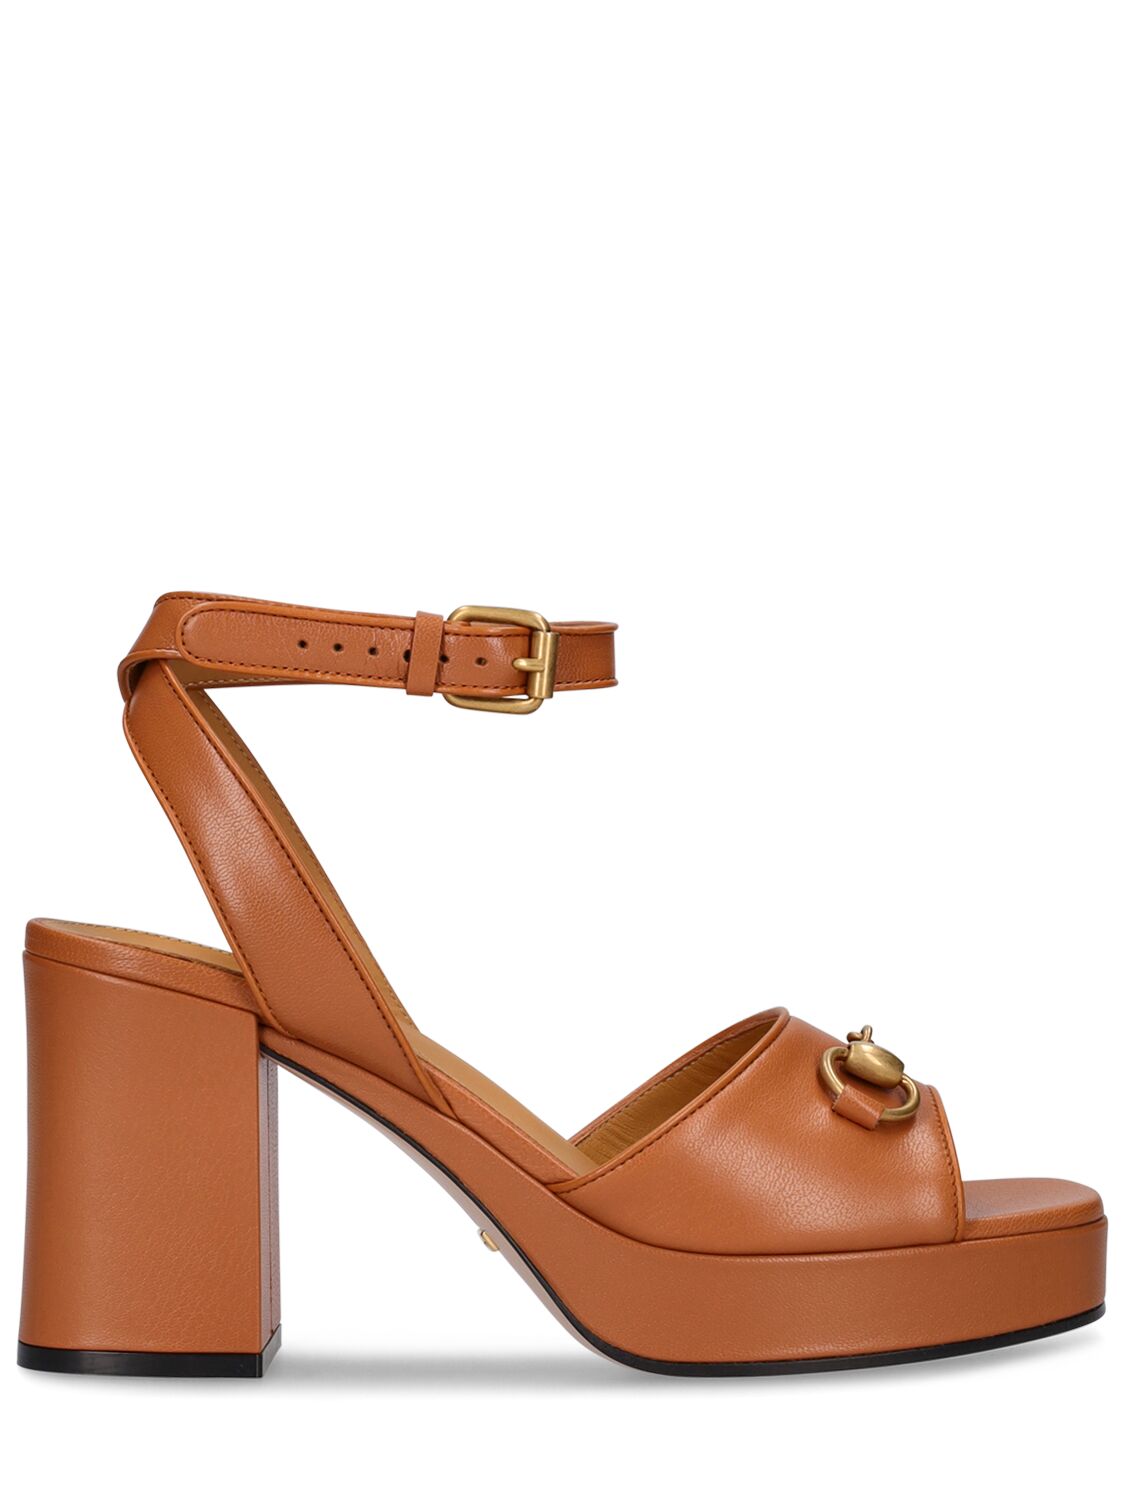 Gucci 60mm Lady Horsebit Leather Sandals In Braun